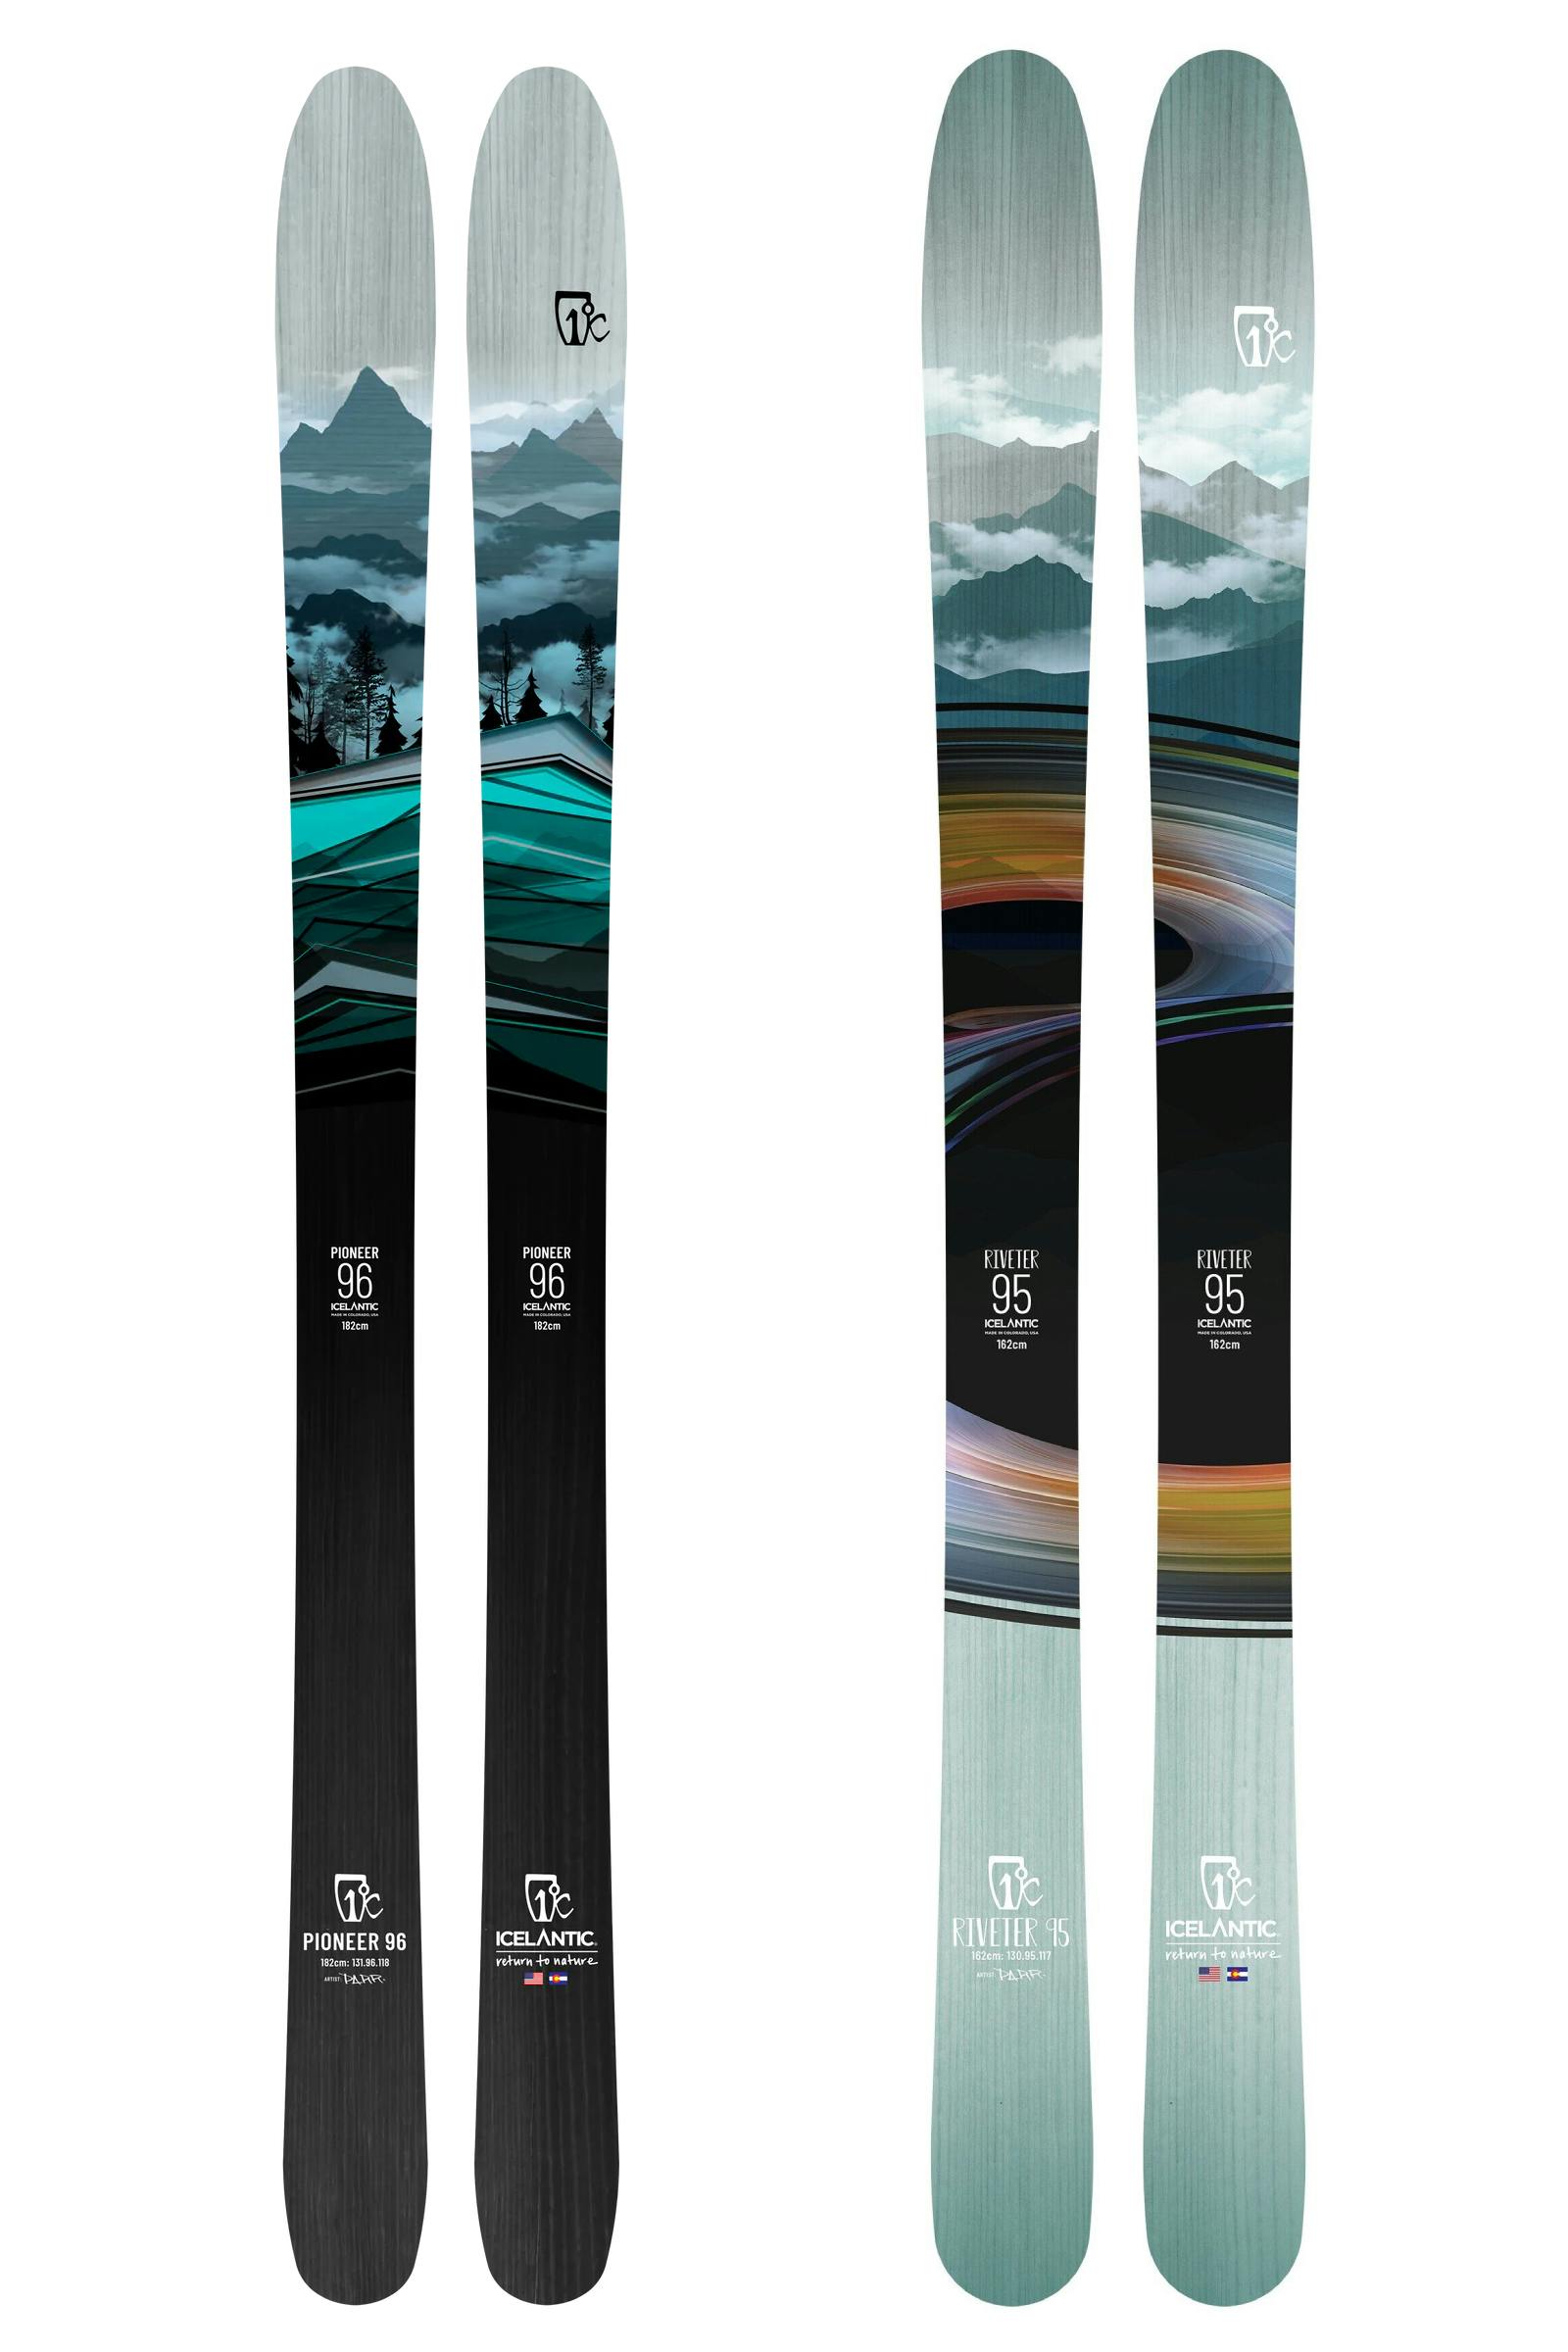 Product image of Pioneer 96 and Riveter 95 skis